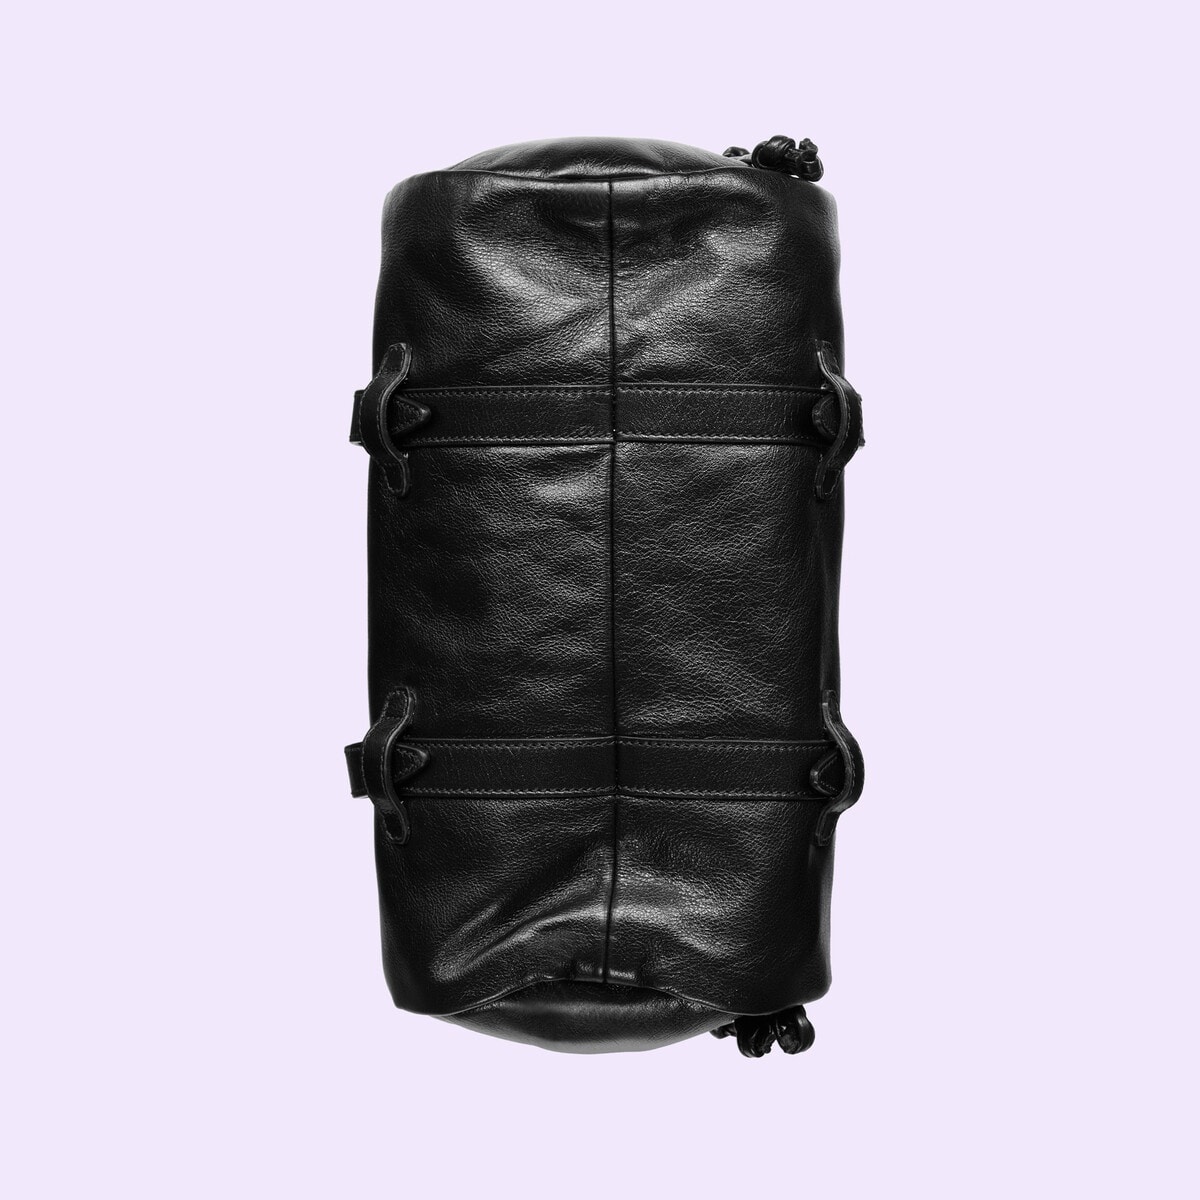 Large duffle bag with tonal Double G